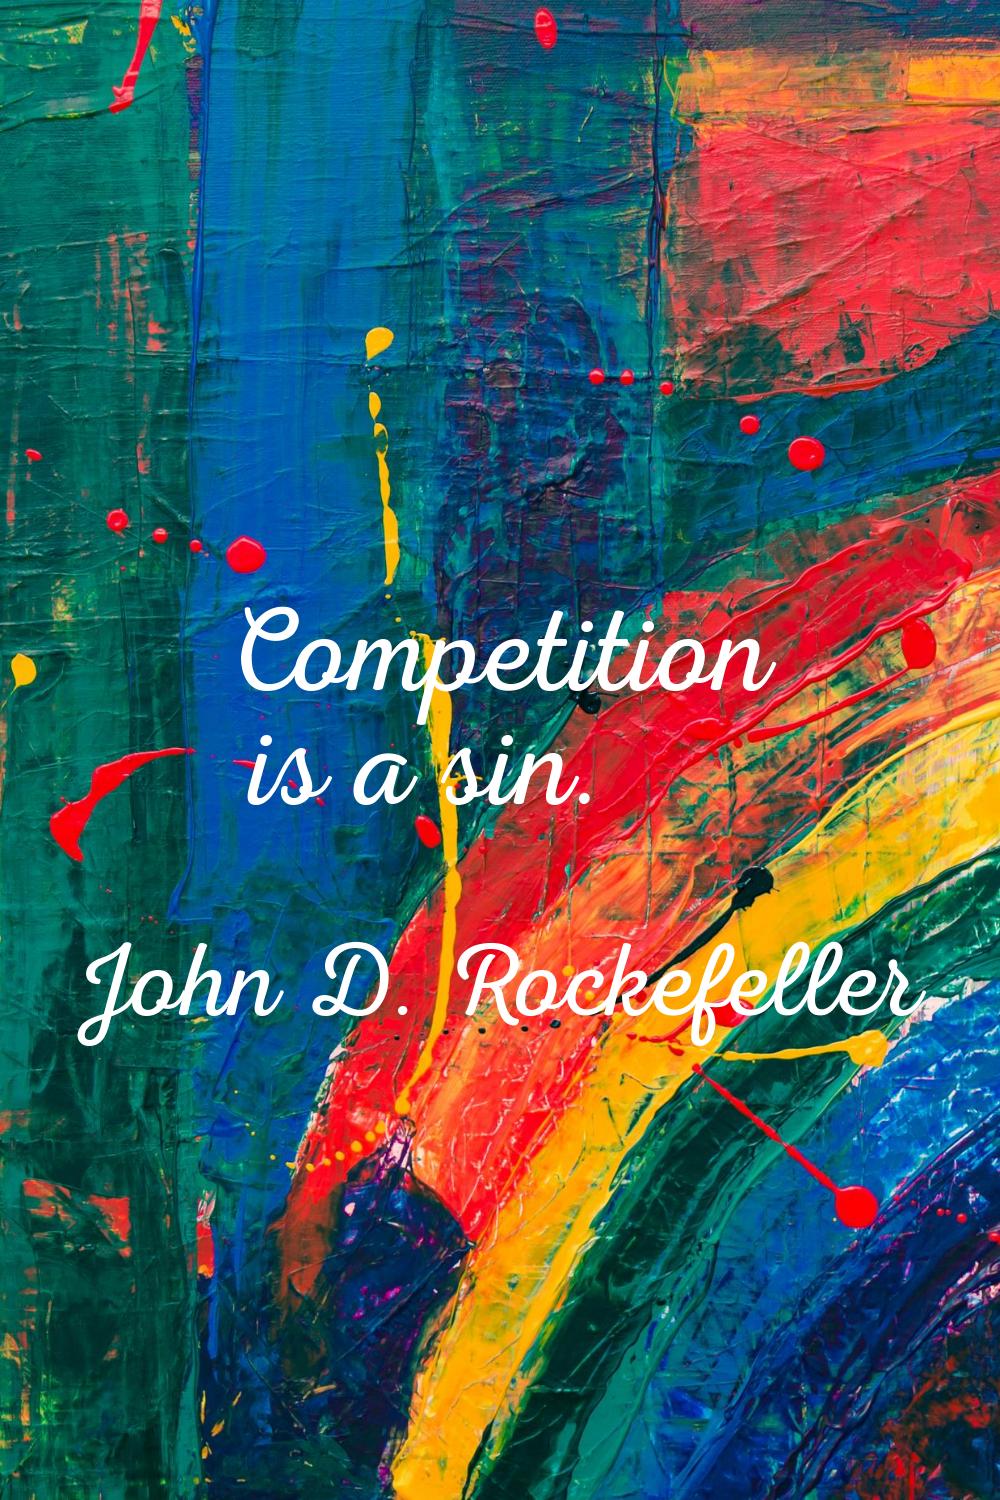 Competition is a sin.